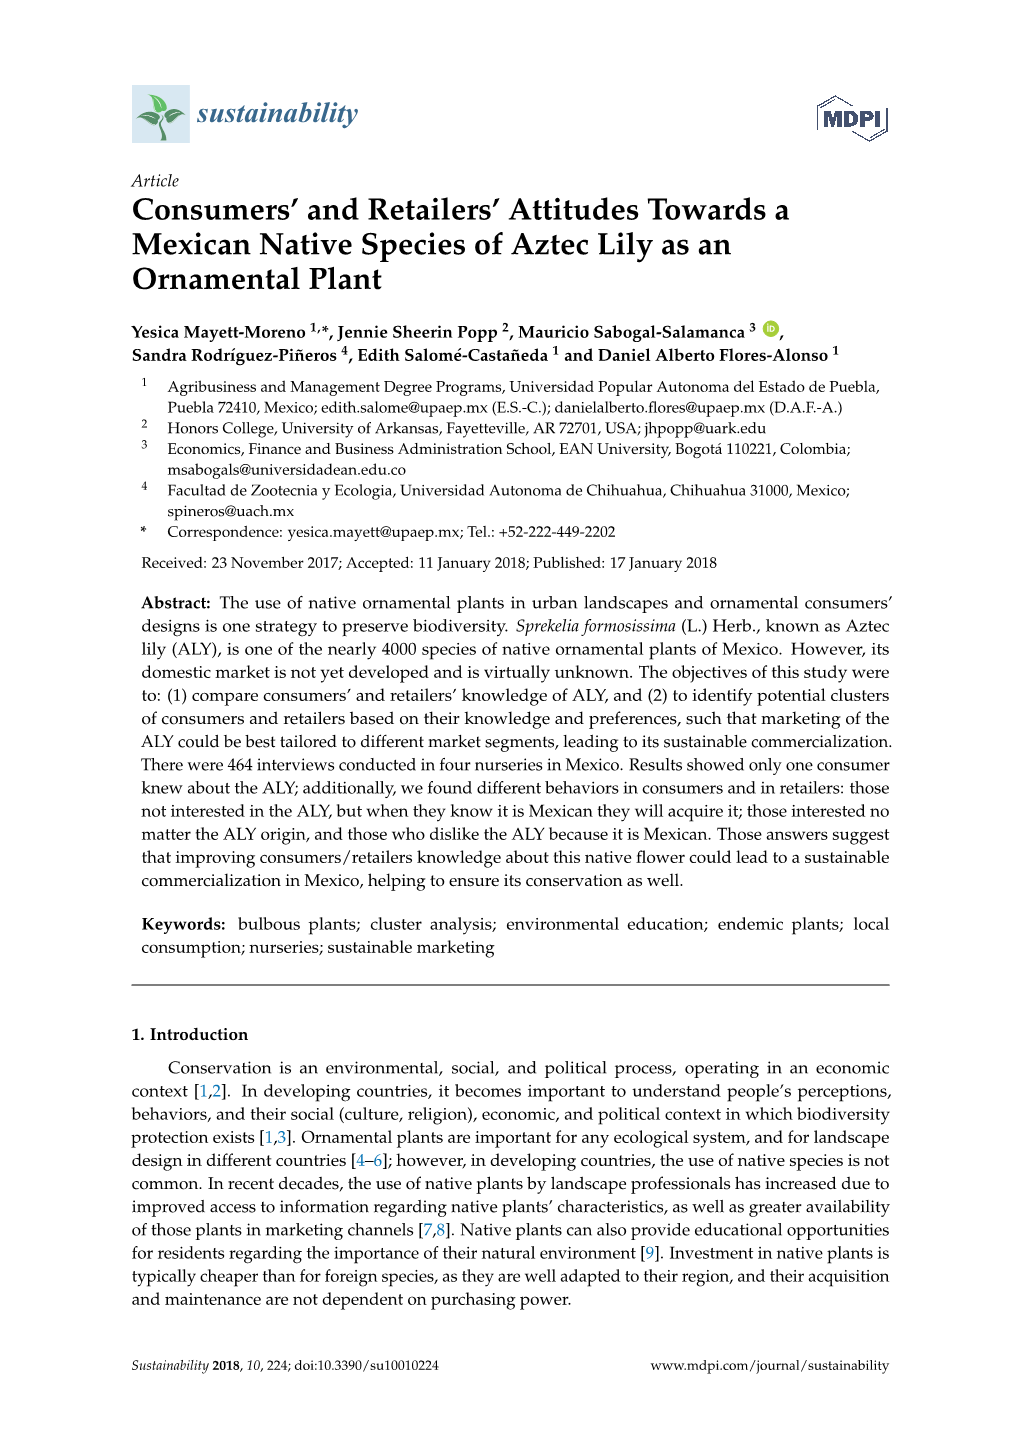 Consumers' and Retailers' Attitudes Towards a Mexican Native Species